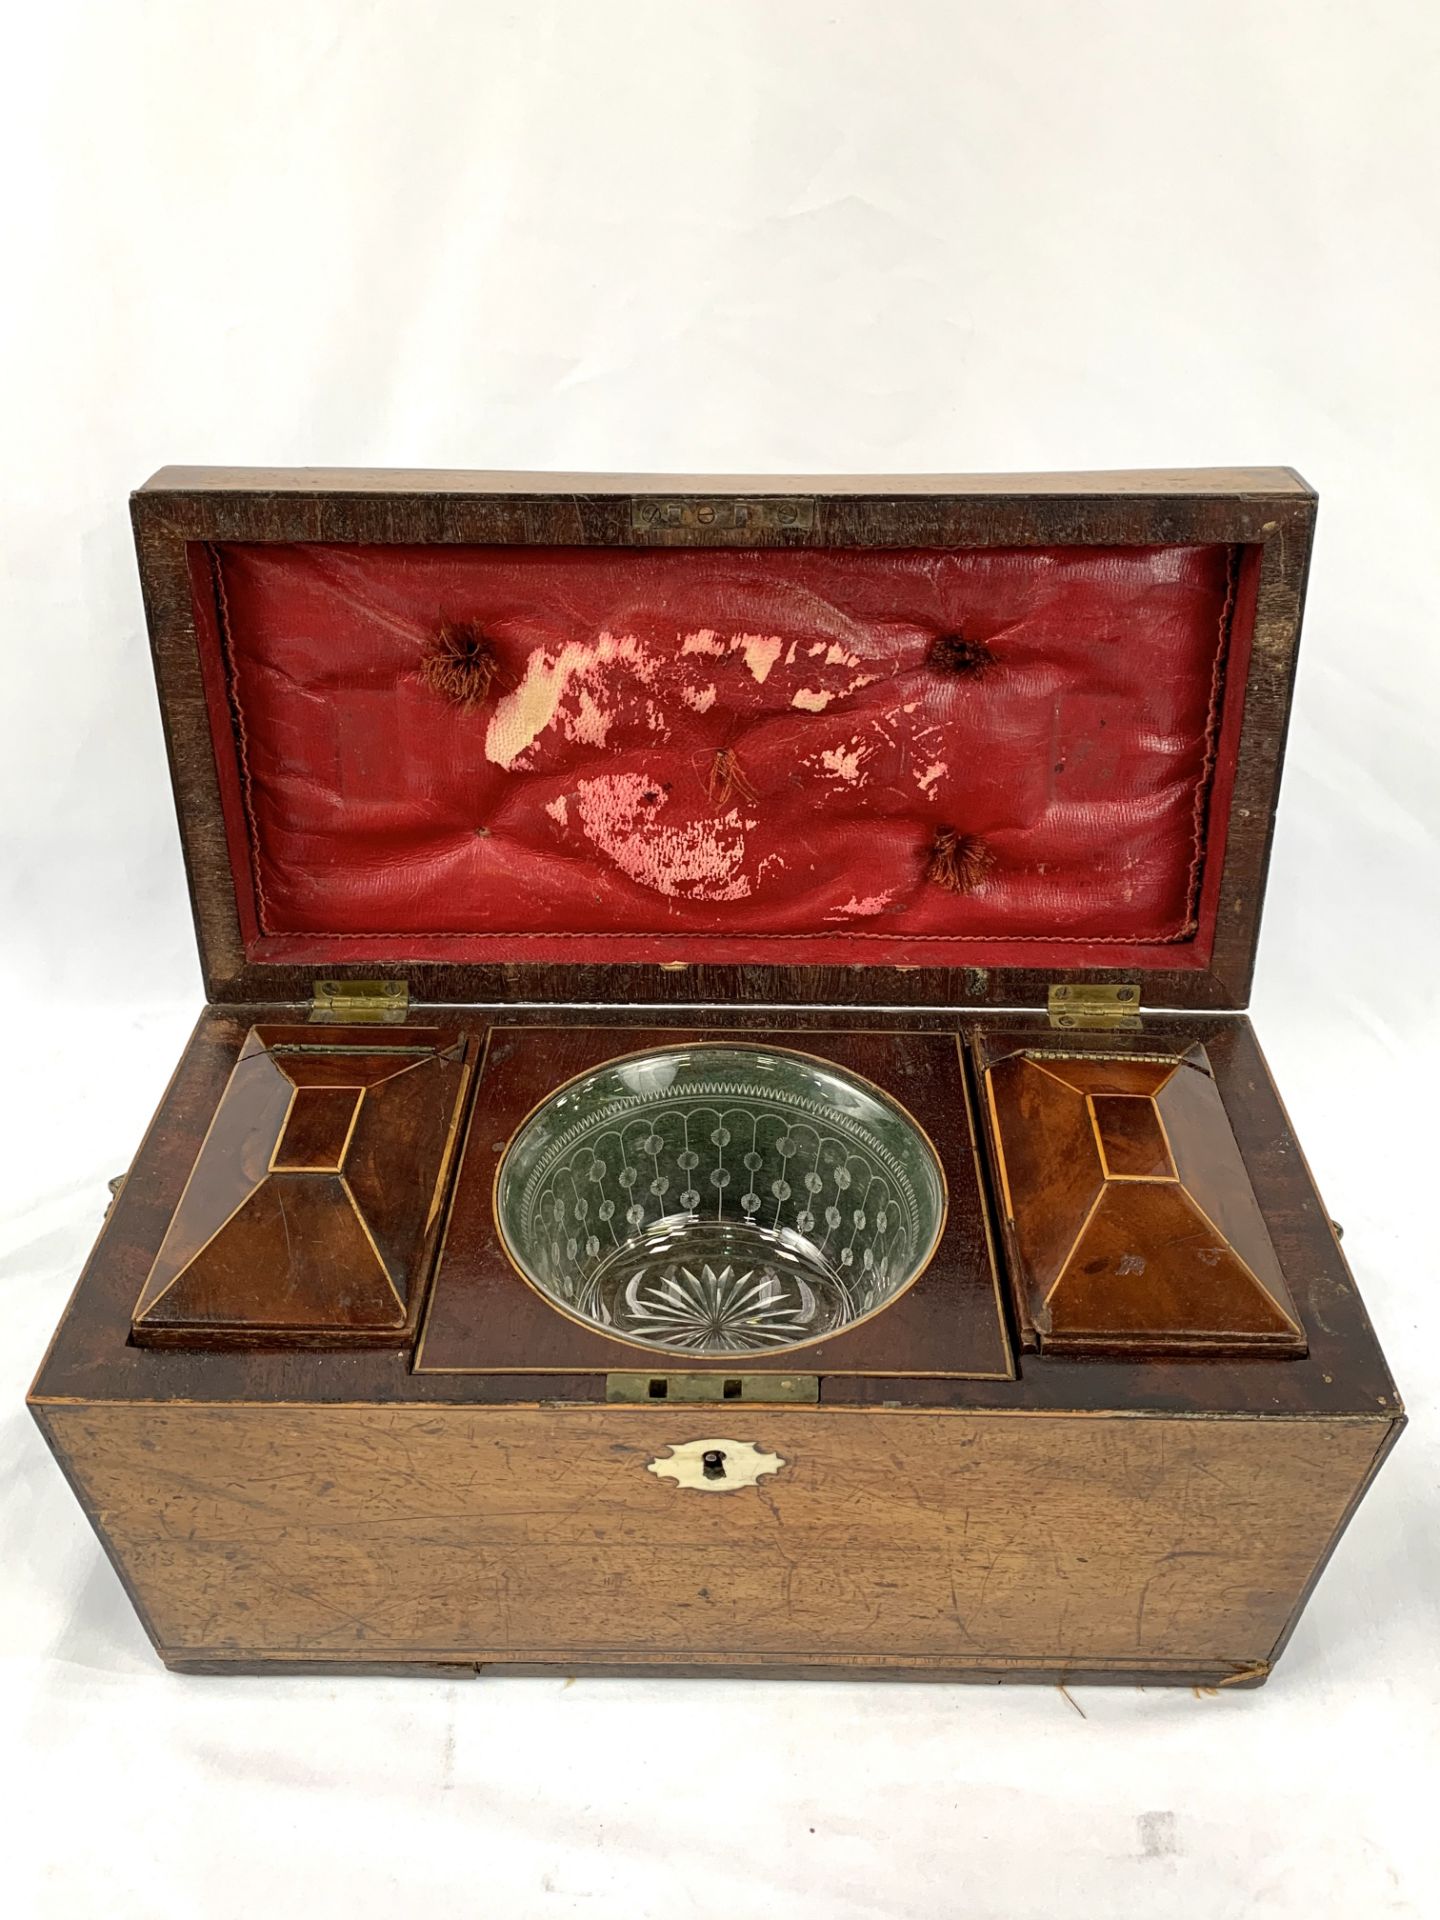 Early 19th Century sarcophagus tea caddy, requires repair. Complete with three glass bowls.